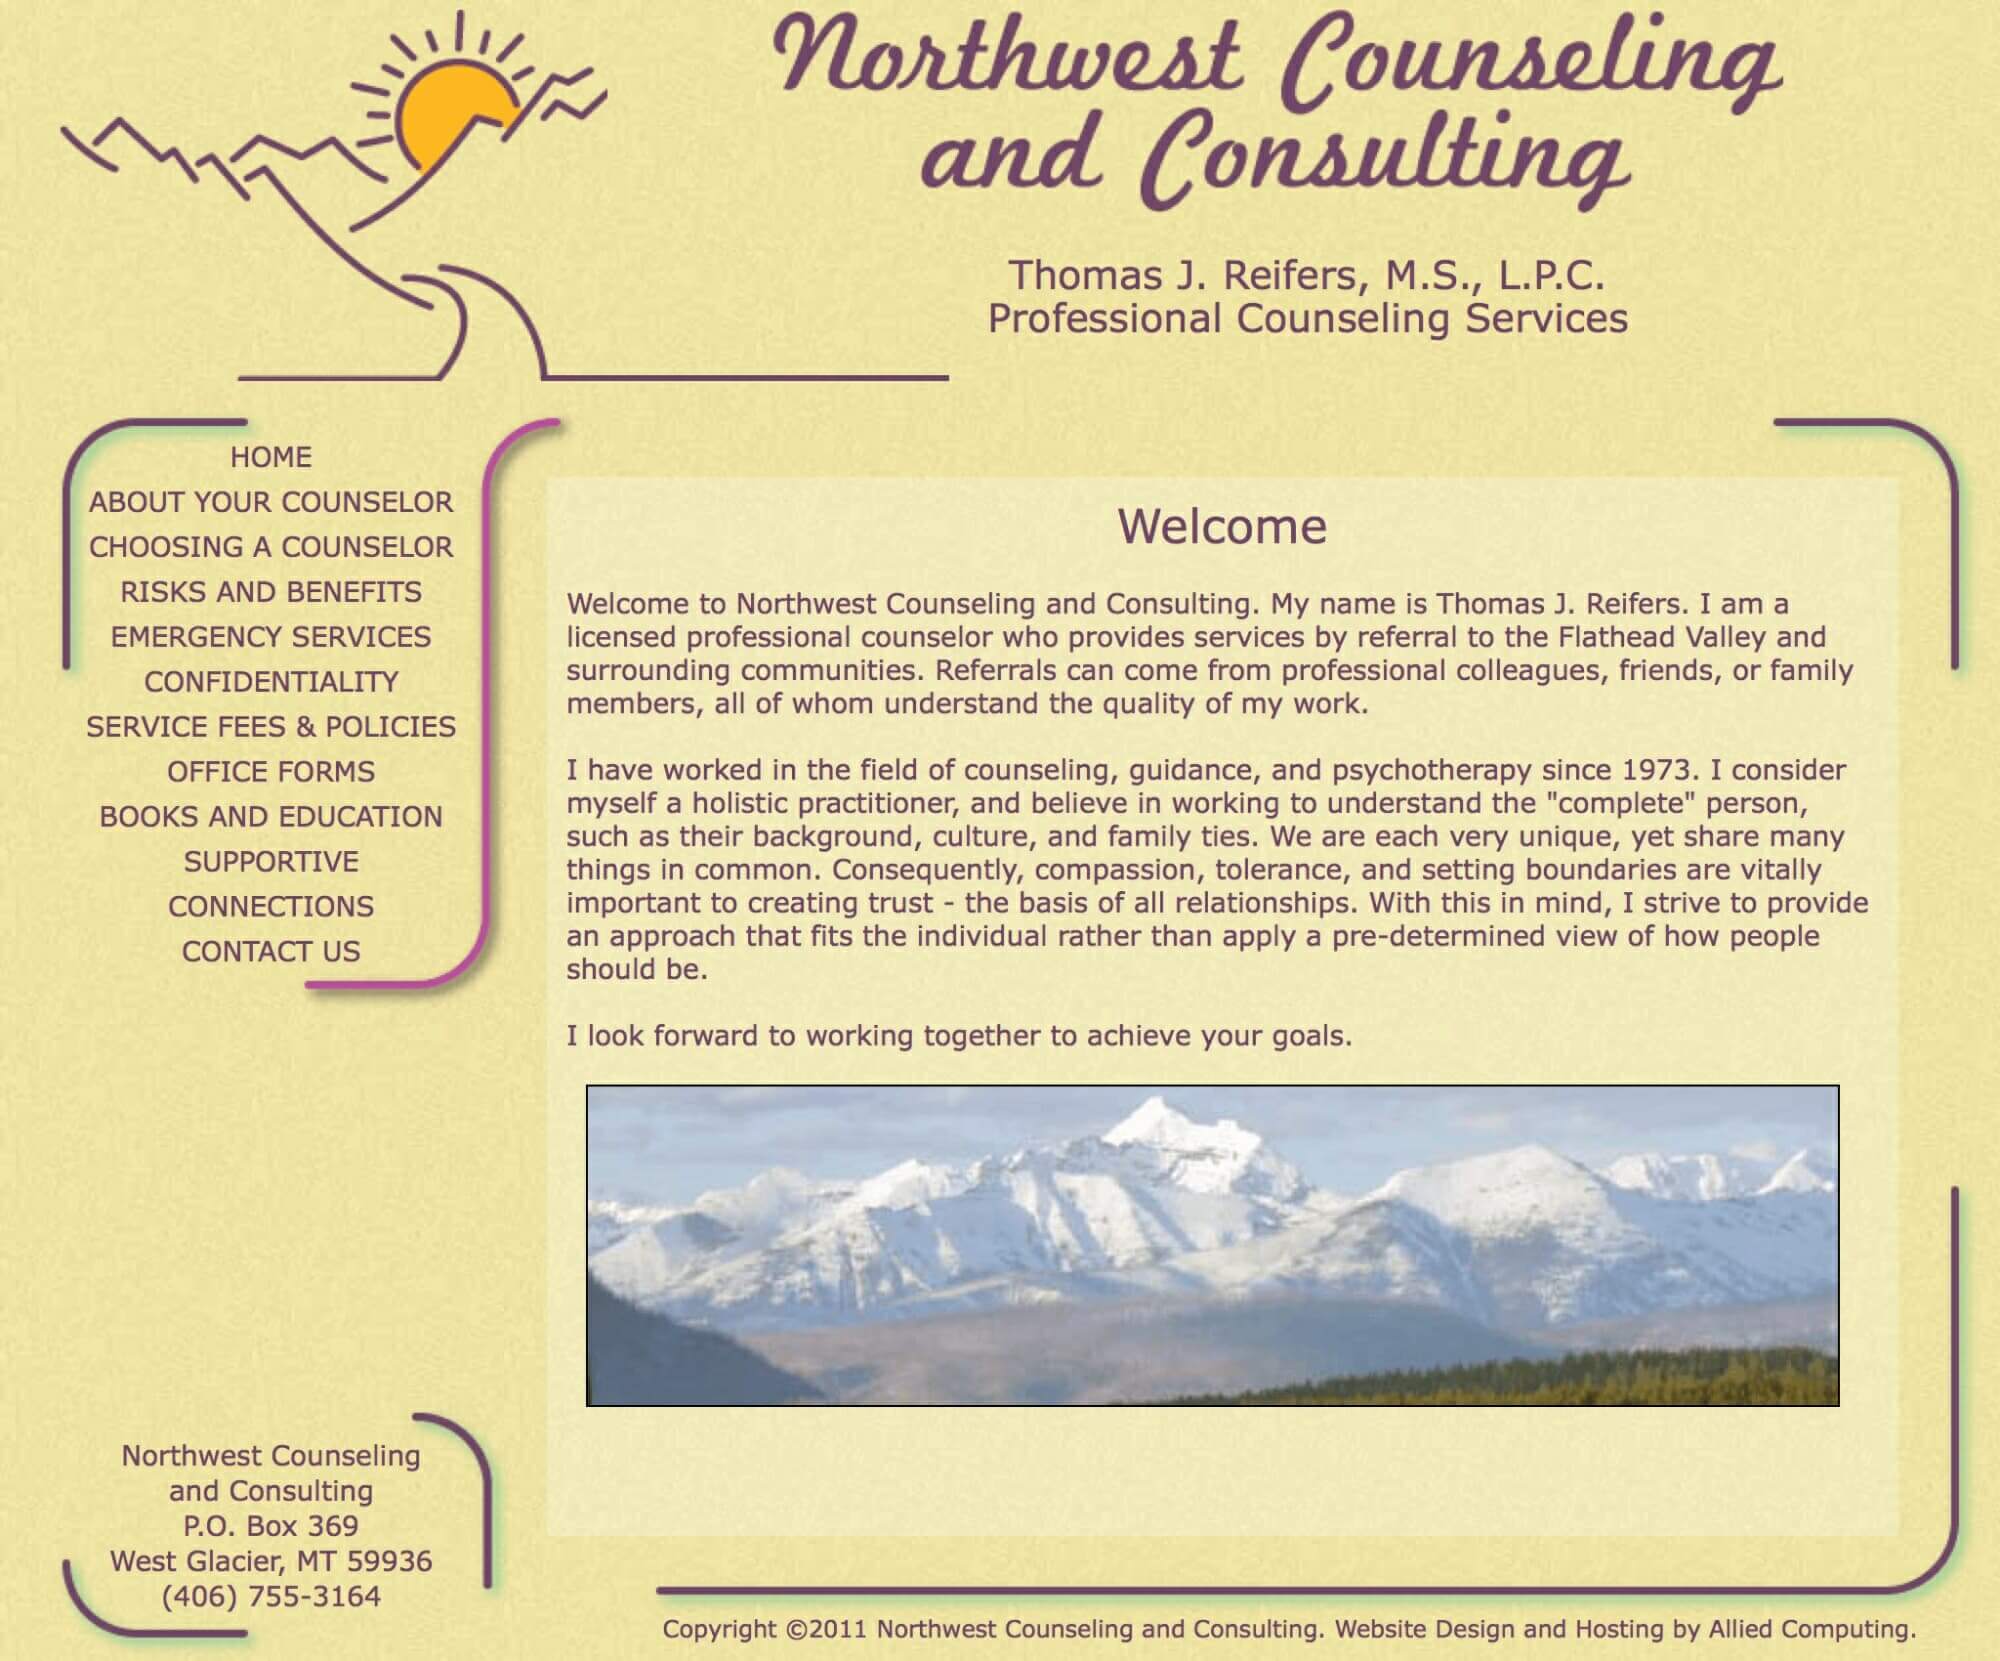 Northwest Counseling and Consulting